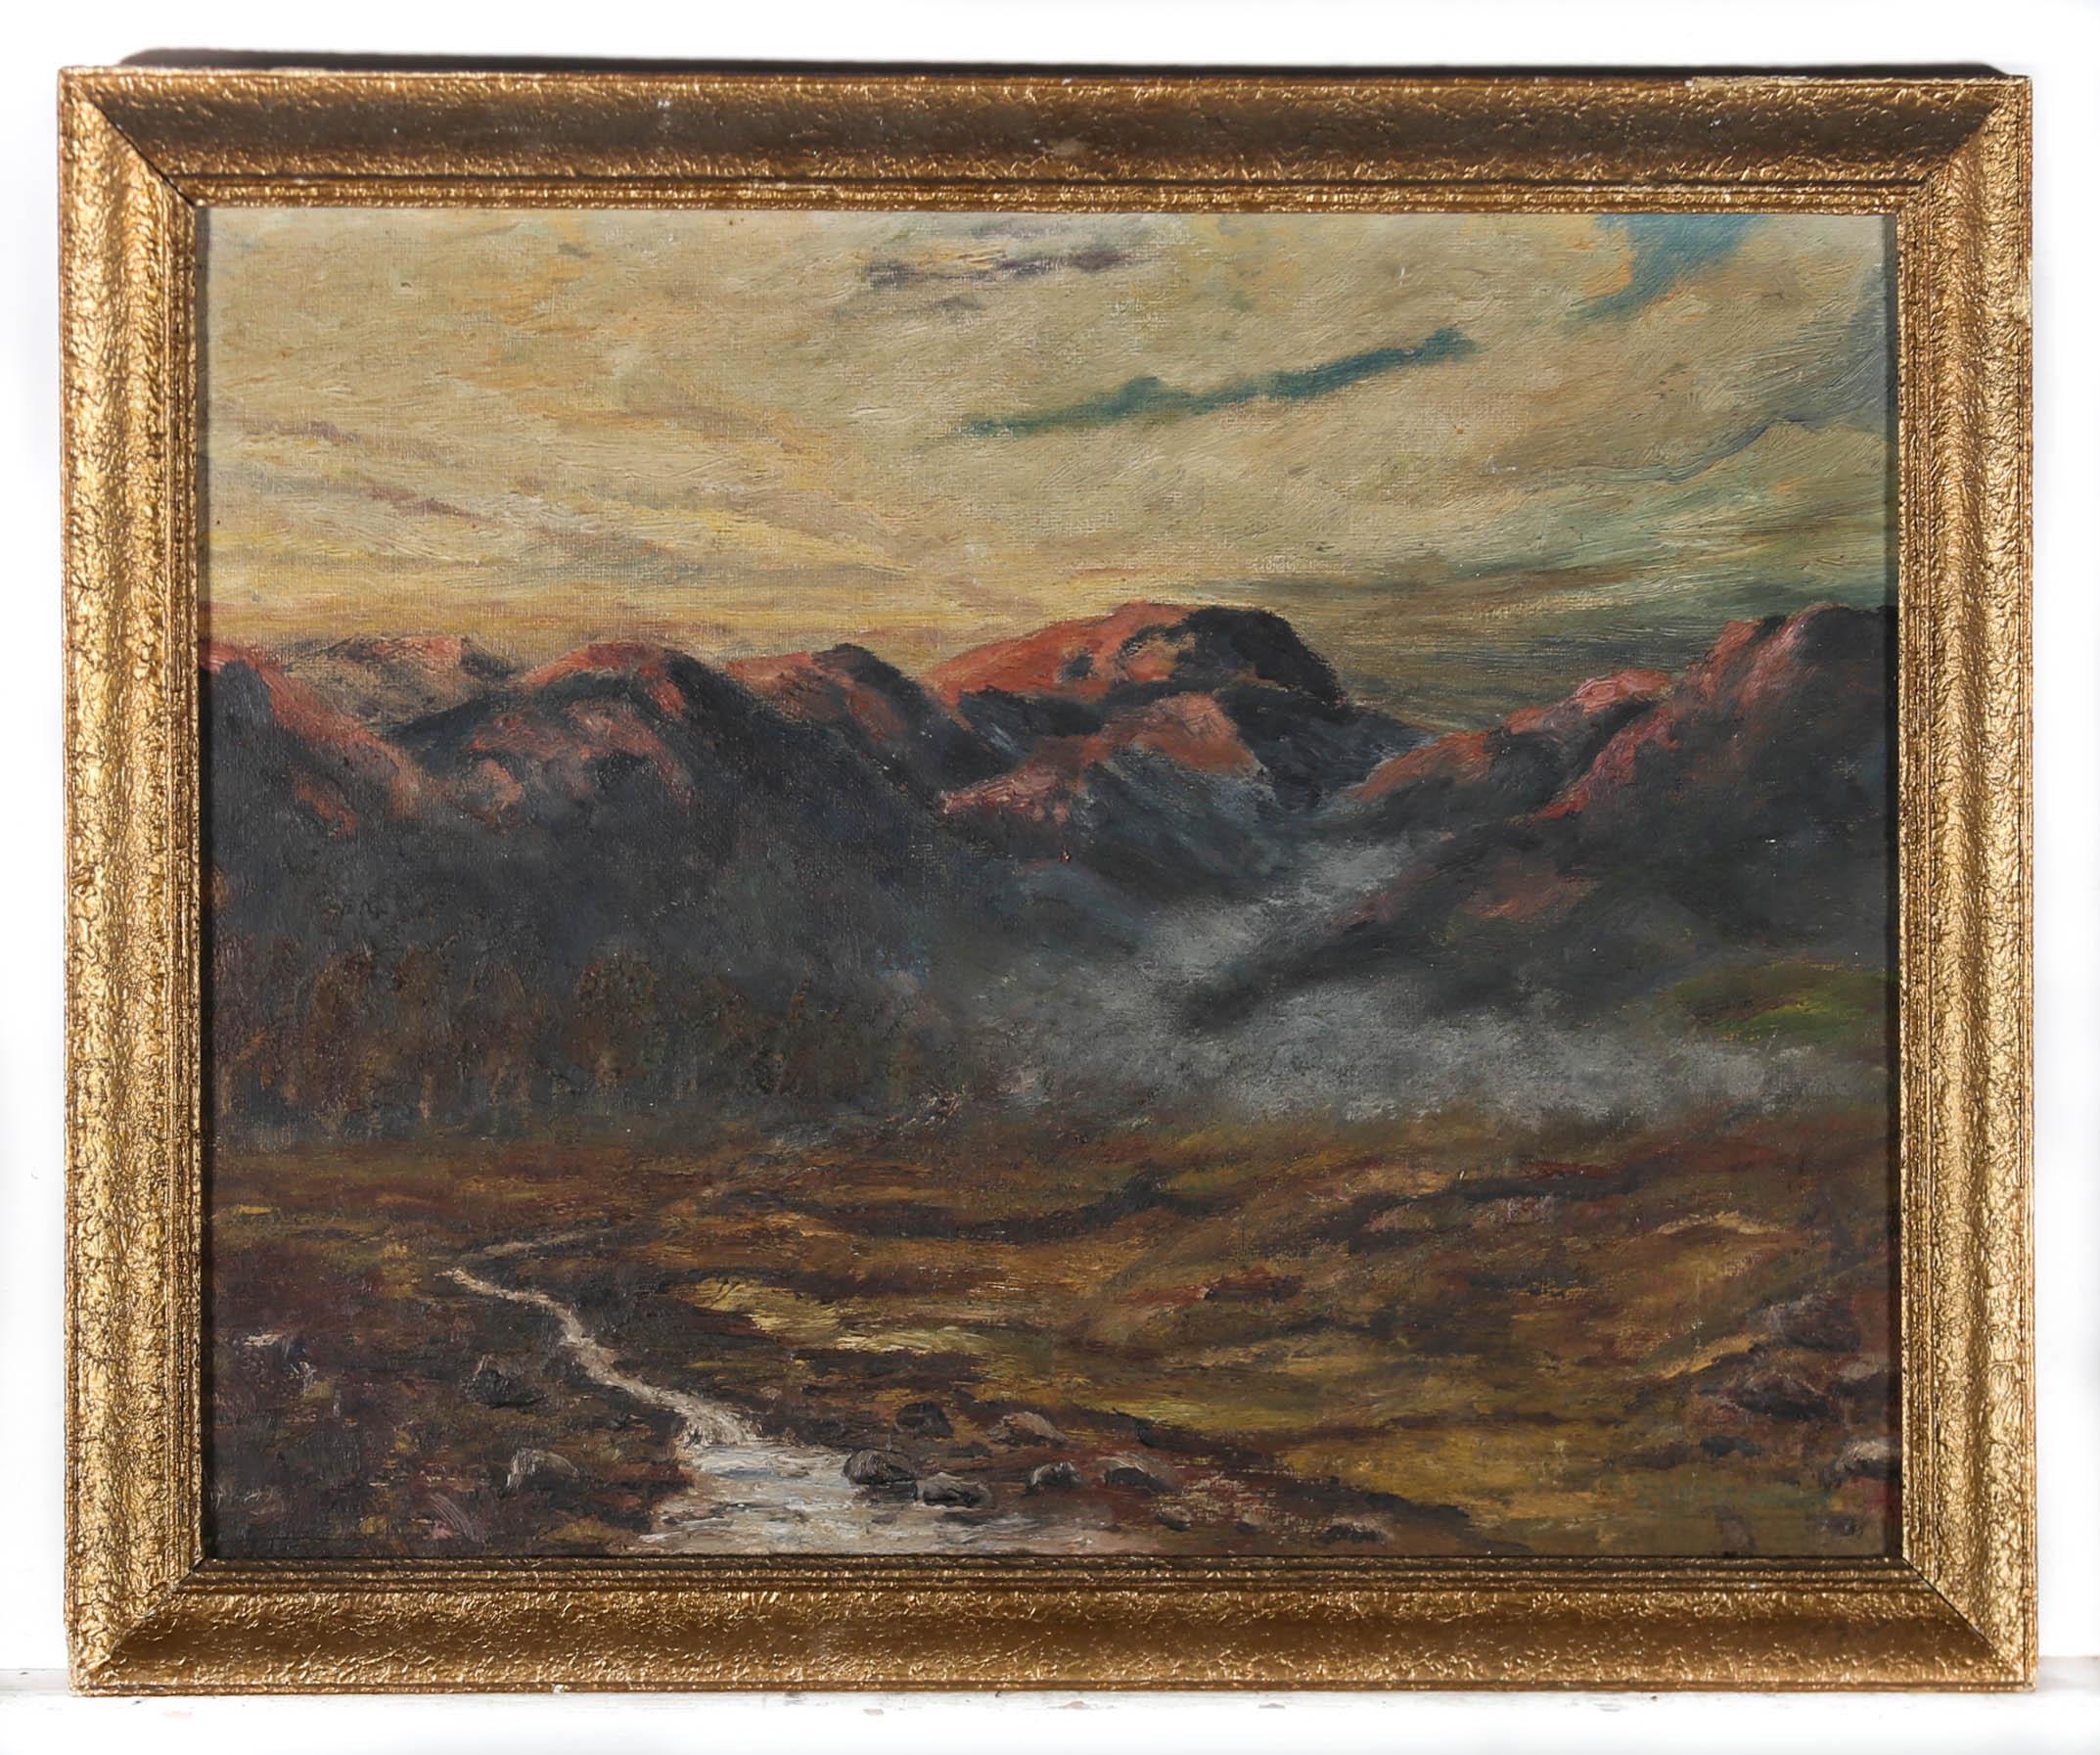 A dramatic mountain view with areas of textured impasto. Well-presented in a foil-effect frame with the title and artist signature illegible verso. On canvas board.
